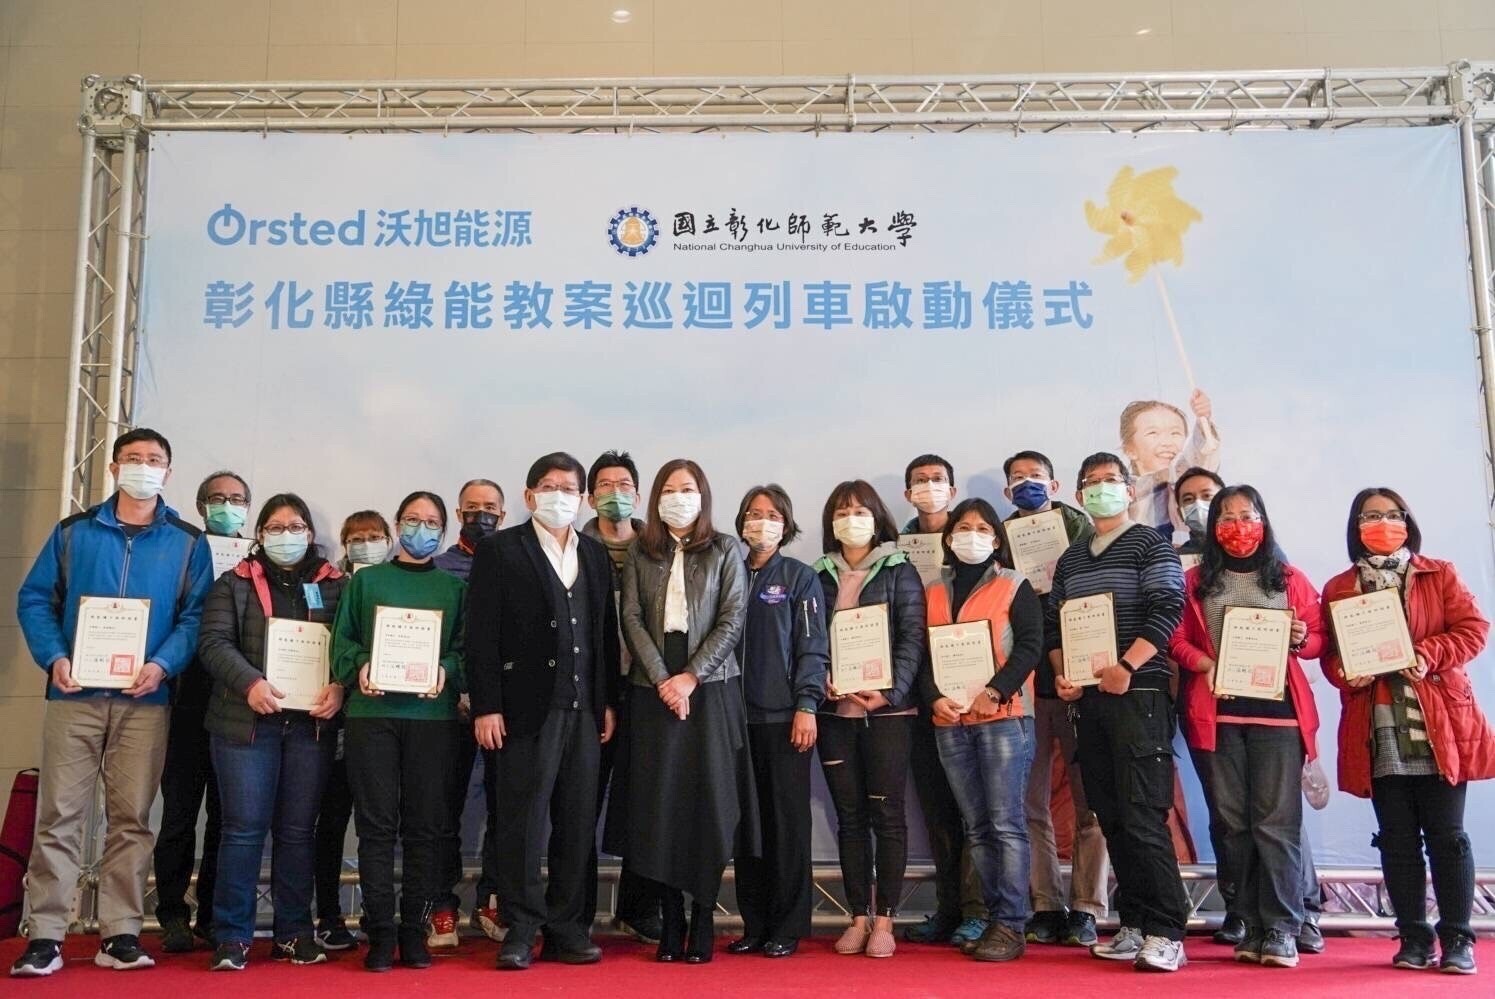 Figure 12. National Changhua University of Education and Ørsted announced the launch of the “Energy Transformation - Changhua God of Wind” green energy education tours